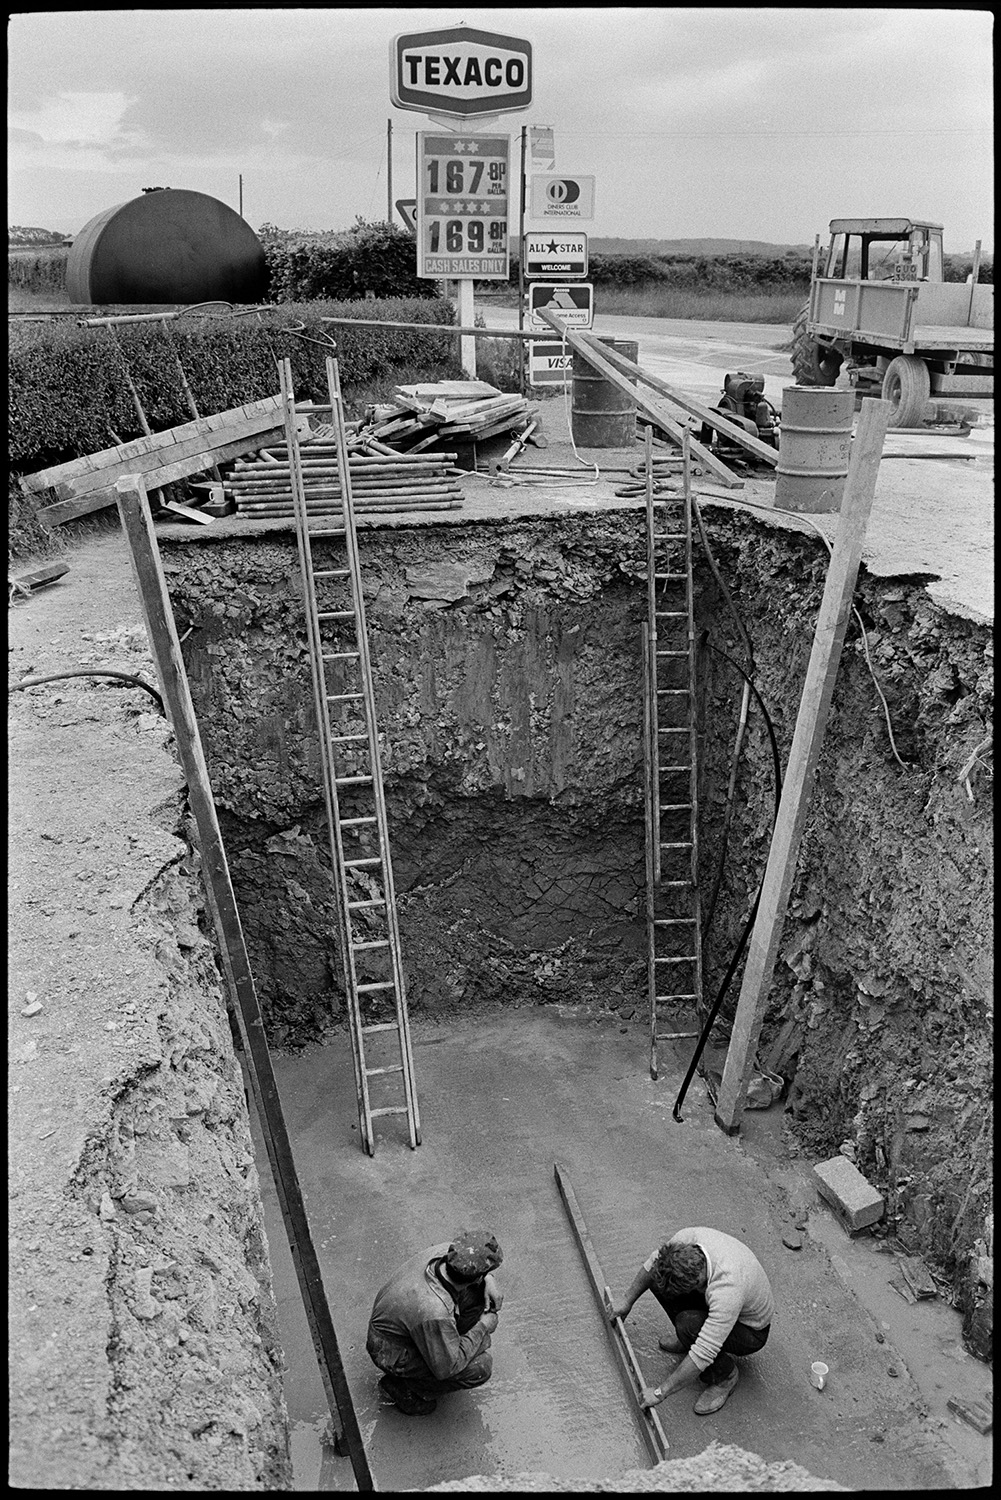 Men with crane installing huge underground petrol tank at garage.
[Two men at Beacon Garage, Dolton Beacon working in a deep excavated hole fitting an underground petrol tank. A lorry and a Texaco garage sign are visible in the background.]